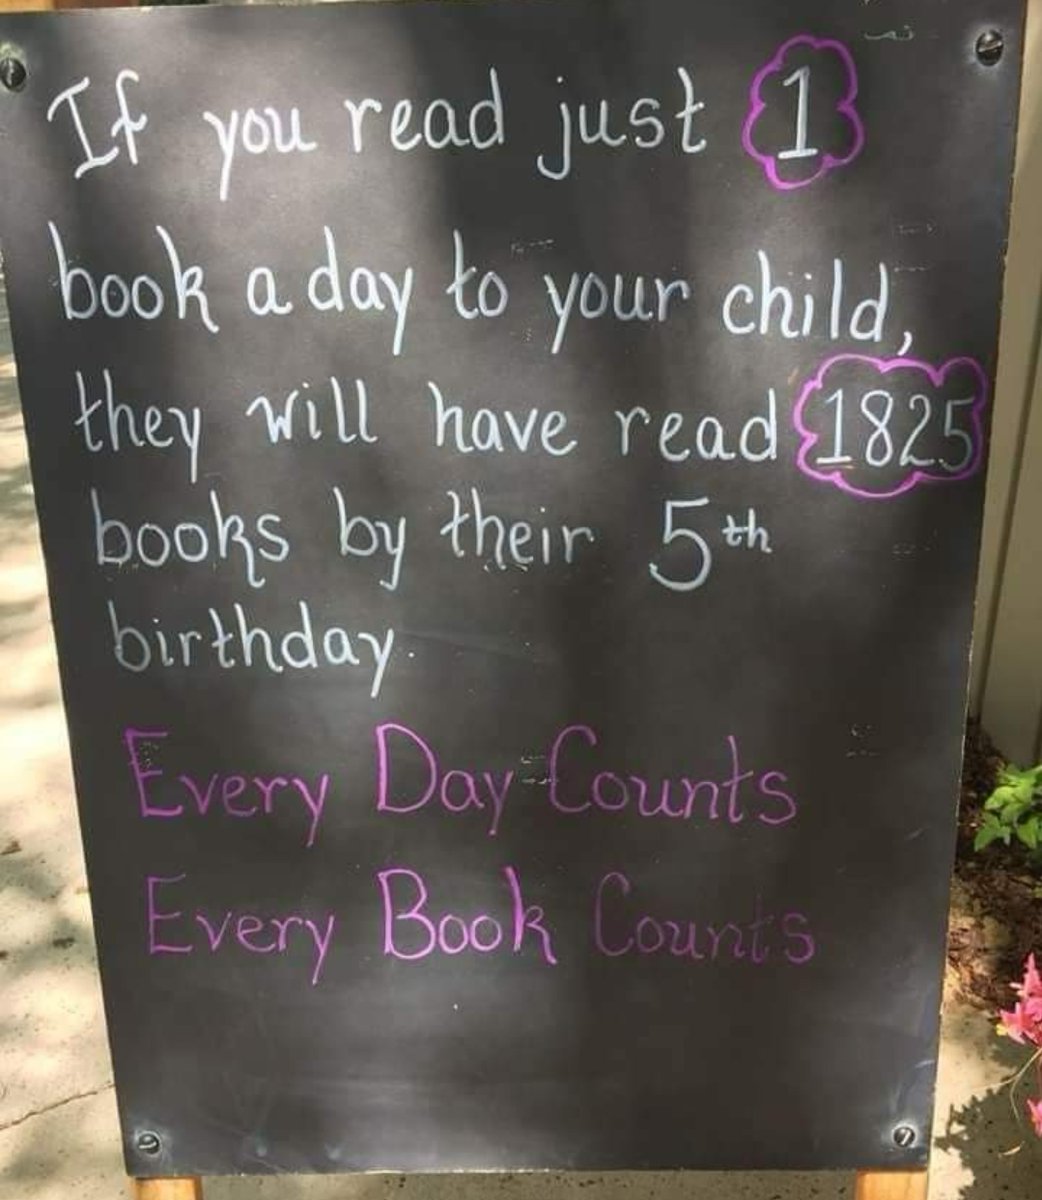 How about this? 

Just one book per day. 

Every day counts. 

Every book counts.

#reading #ReadingCommunity #ReadingToKids #ReadingWithKids #ChildhoodLiteracy